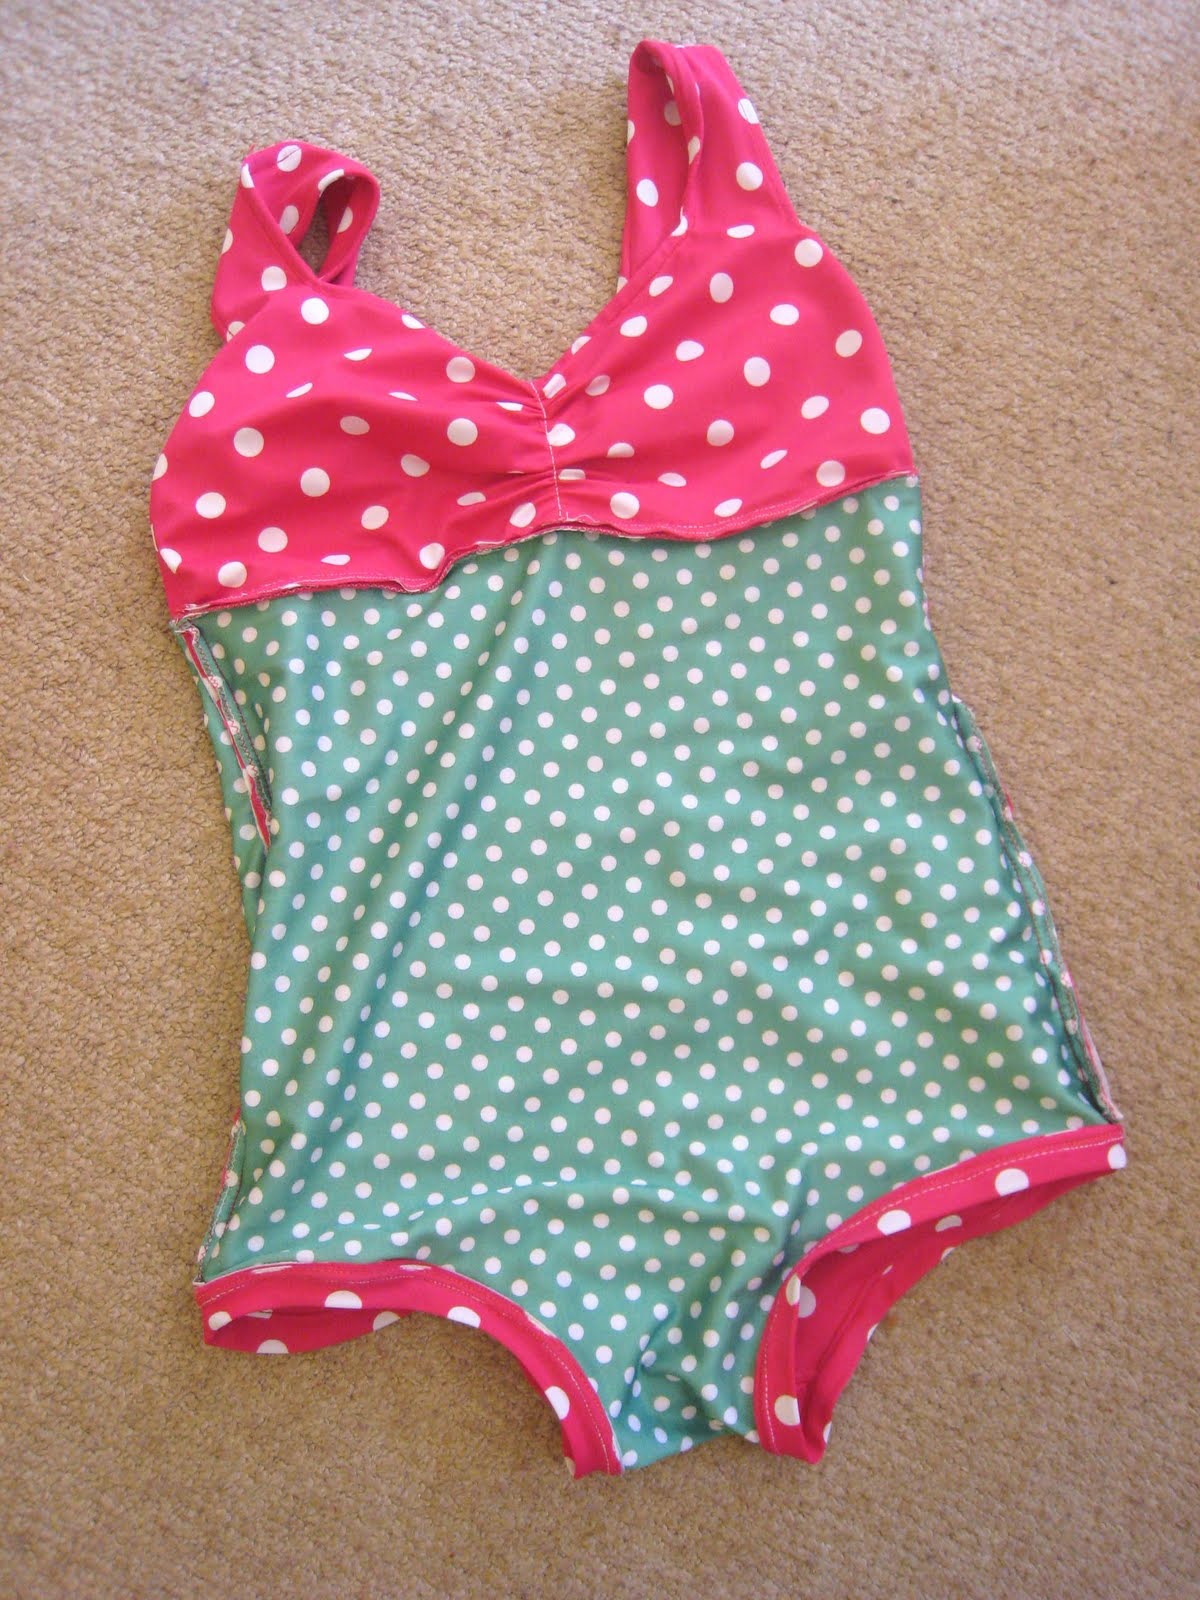 Kitschy Coo: Pin up bathing suit v2.0: The girls go it alone